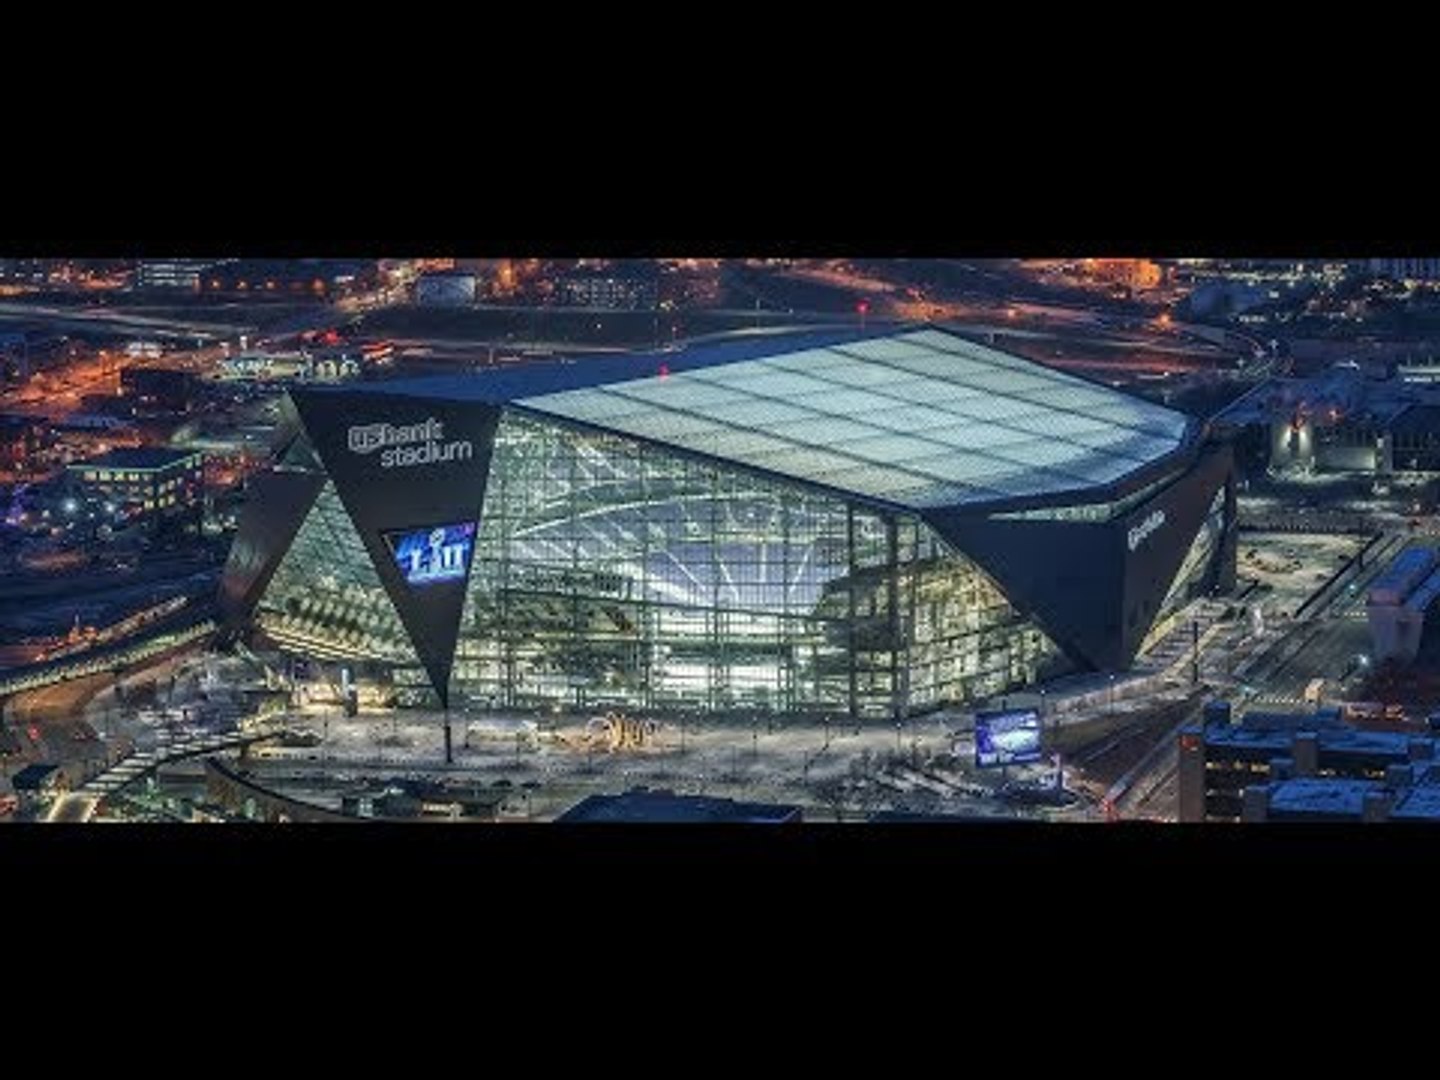 Live From Super Bowl LII: NBC Deploys Quartet of Onsite Sets for Six Hours  of Sunday Pregame Programming